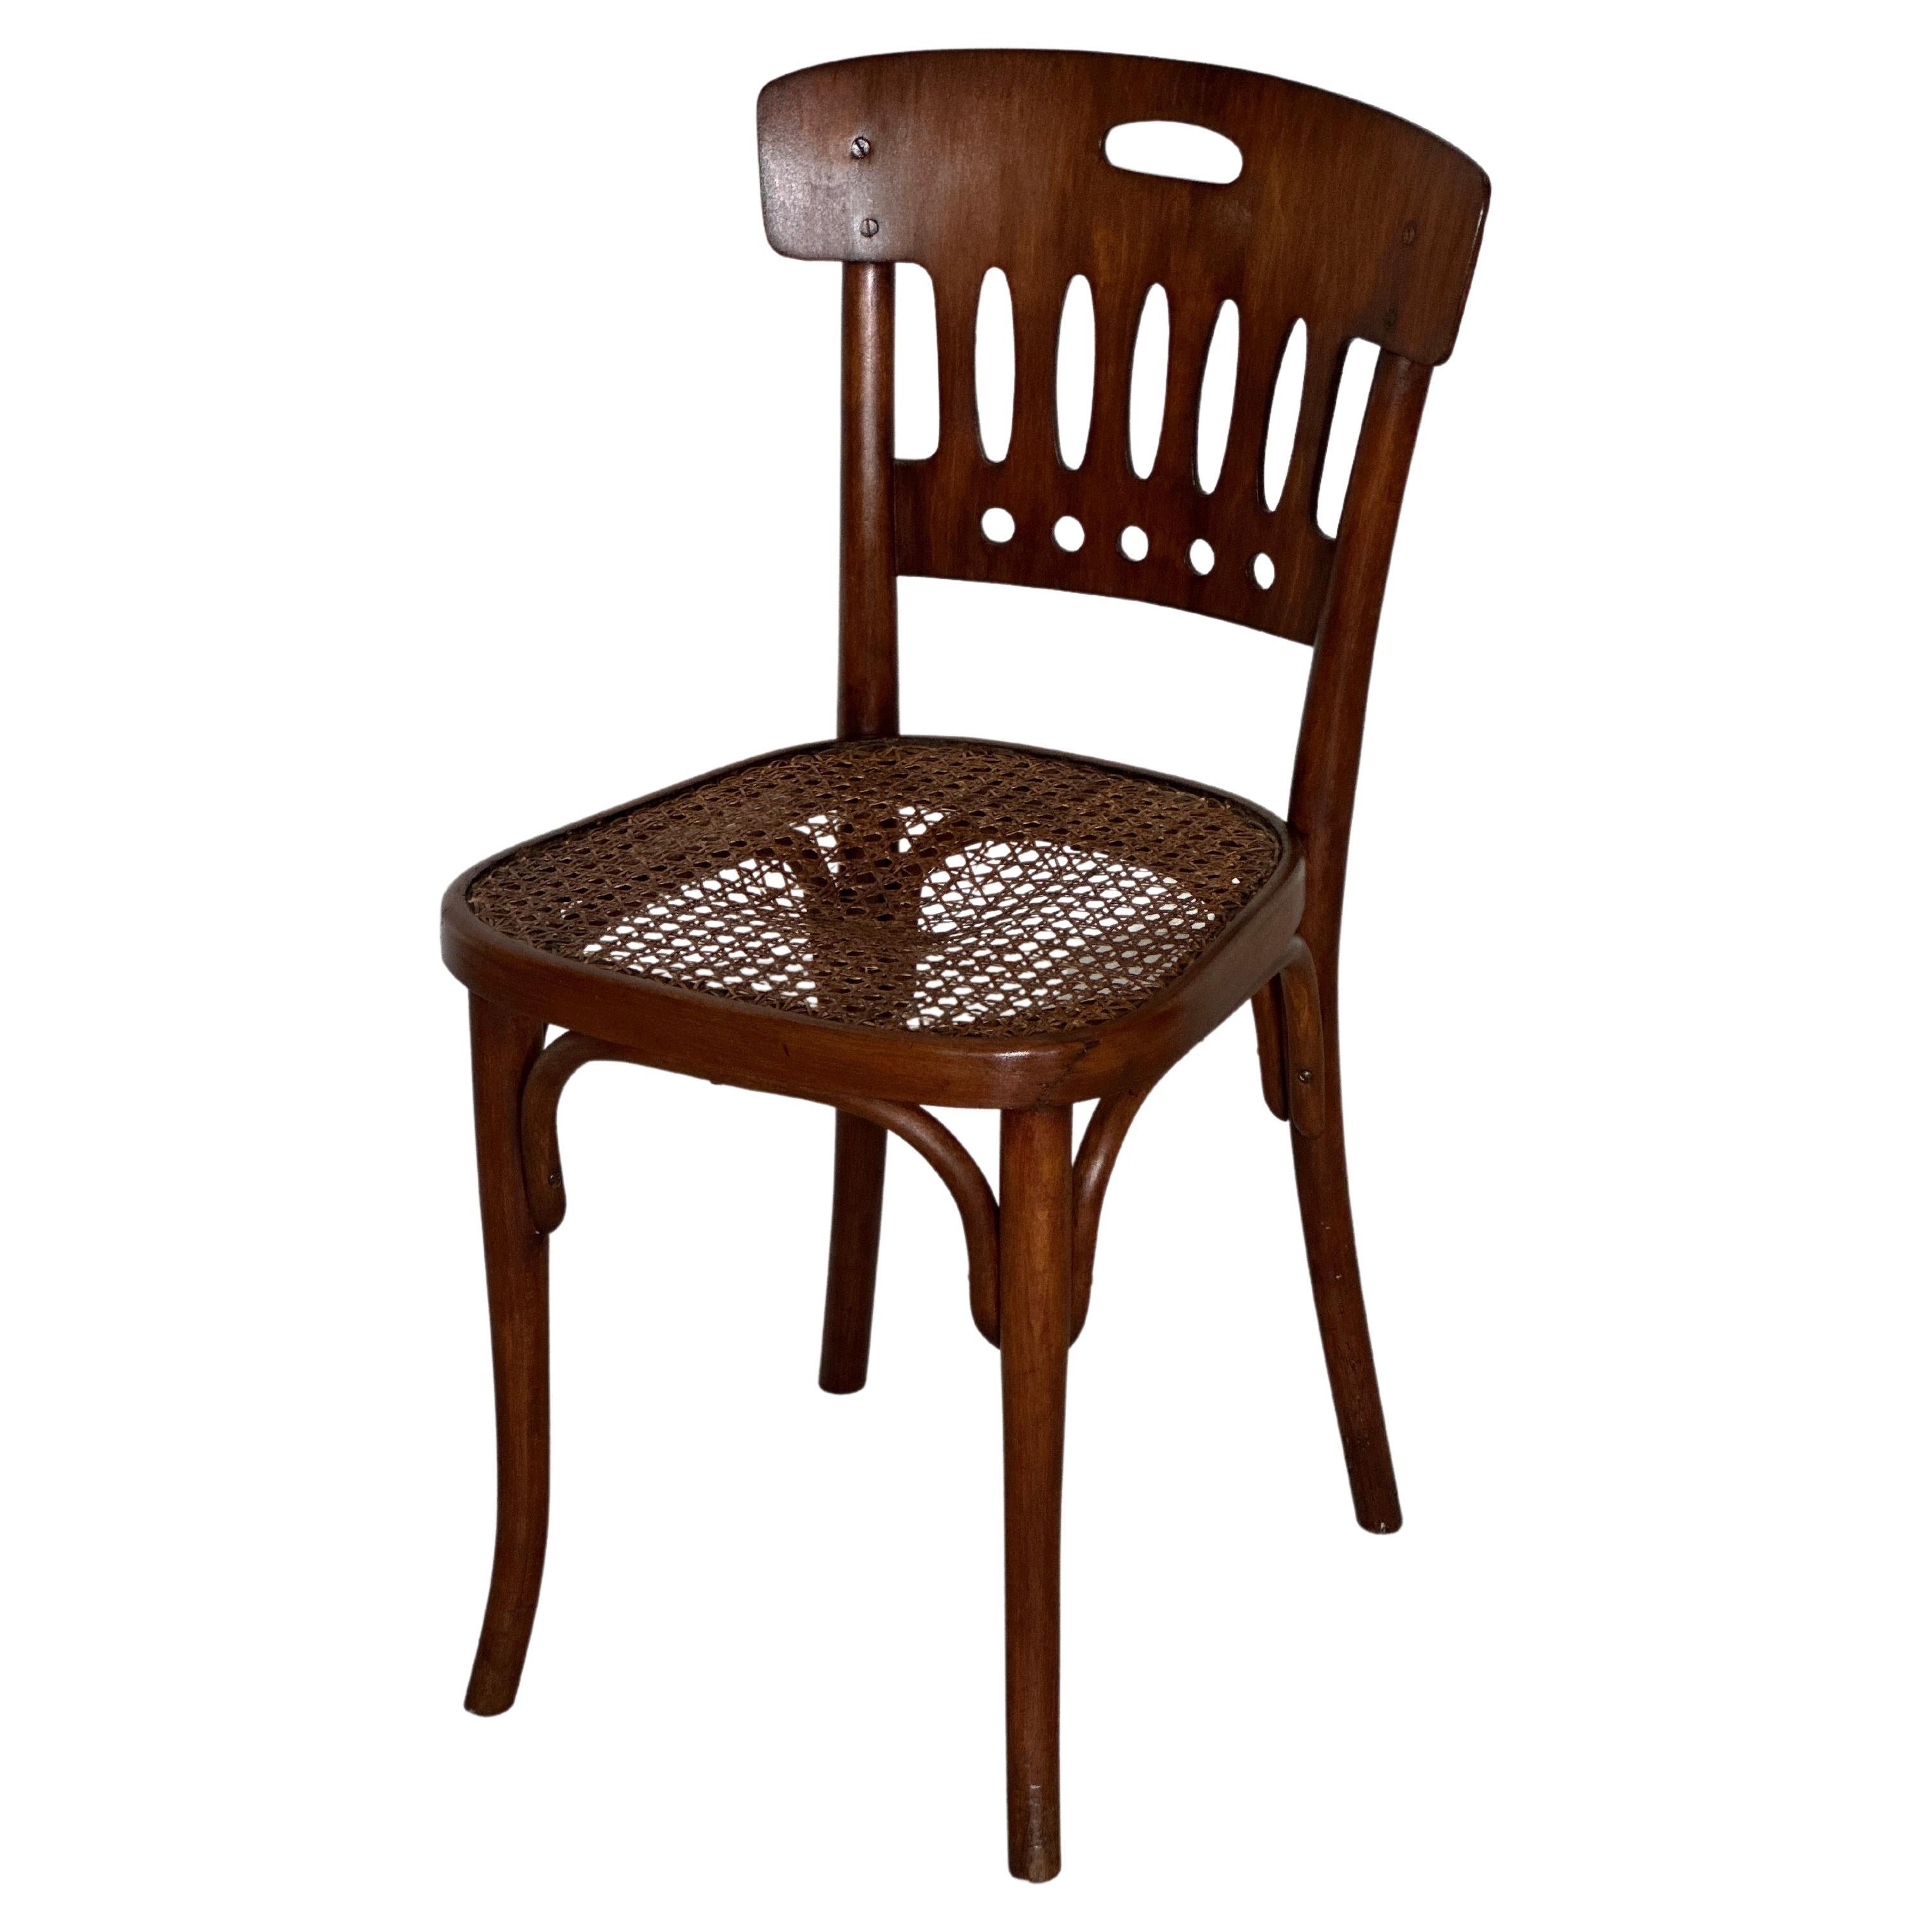 Thonet chair 1910s For Sale